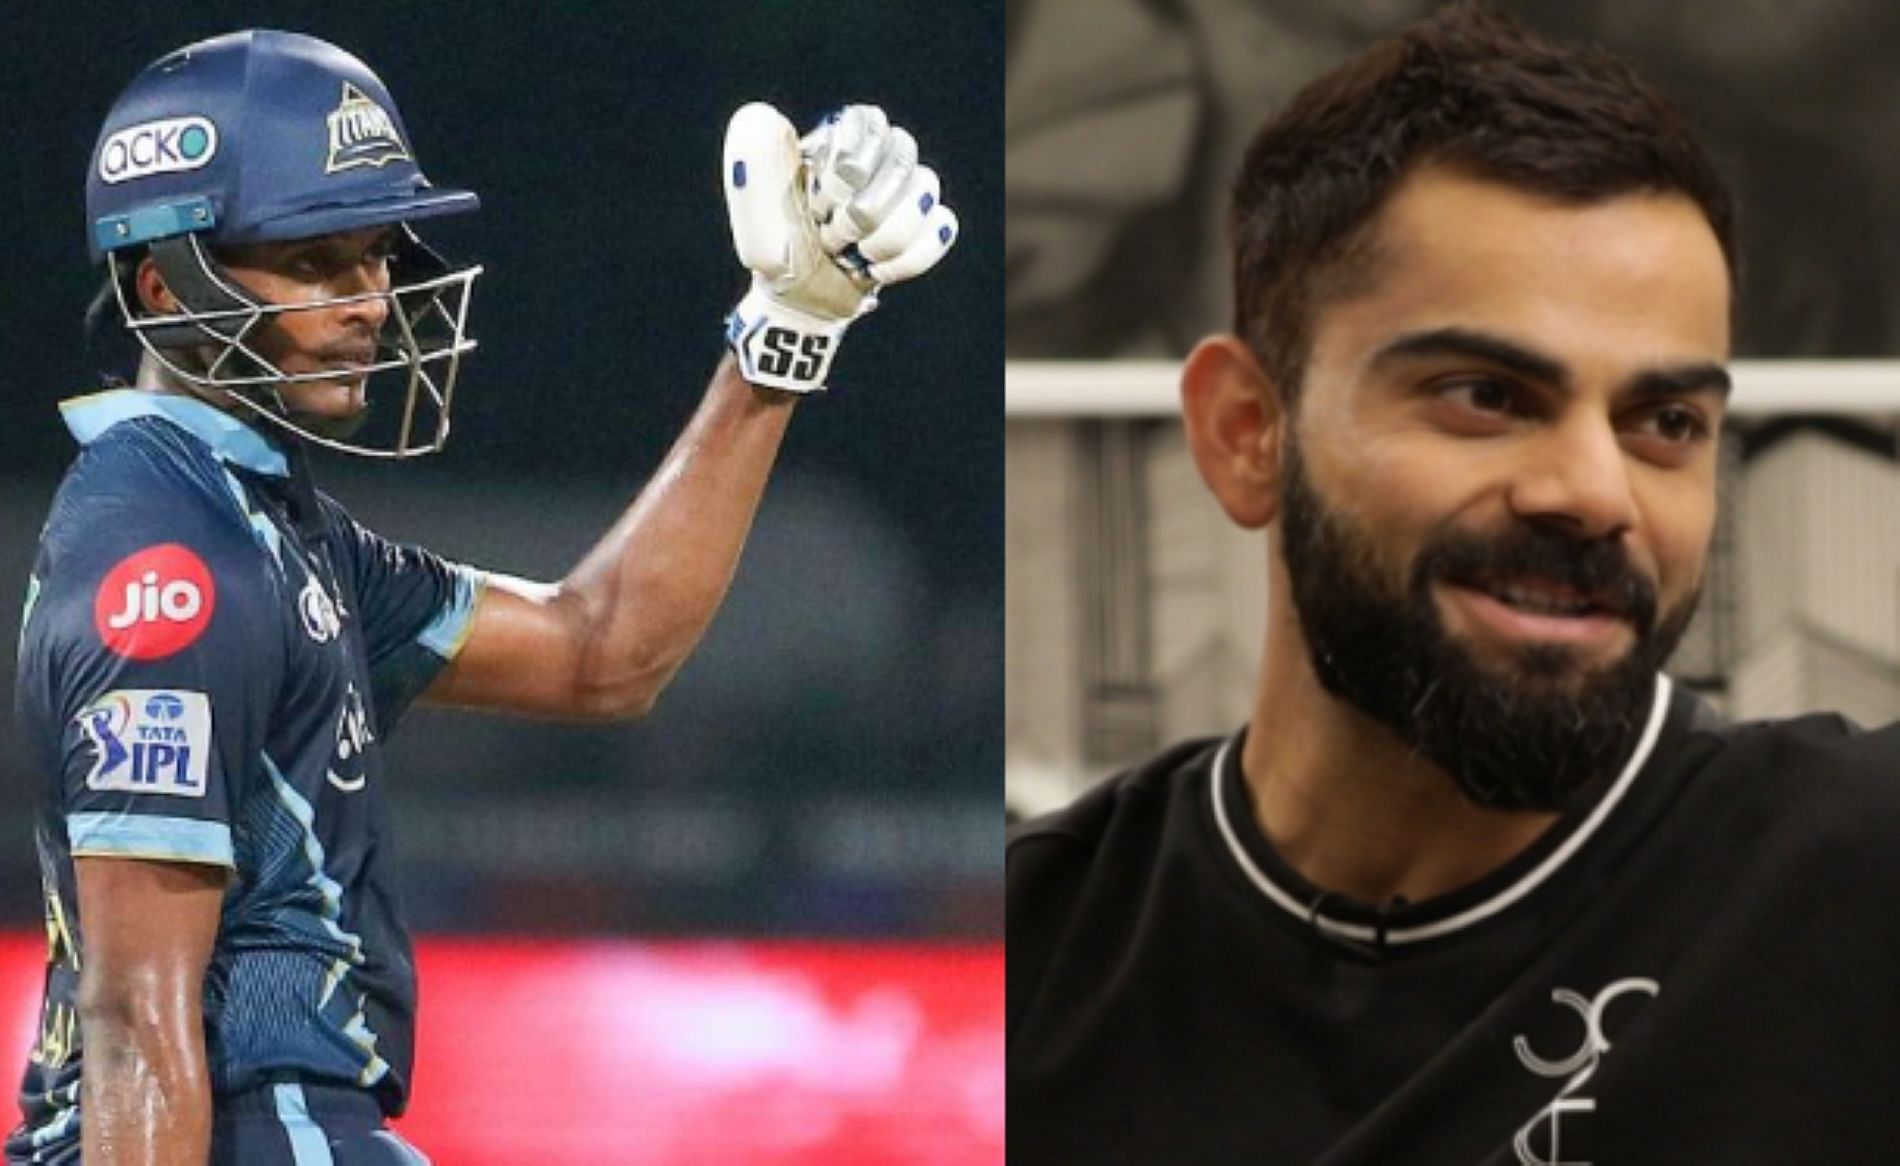 Virat Kohli has inspired several cricketers over the years